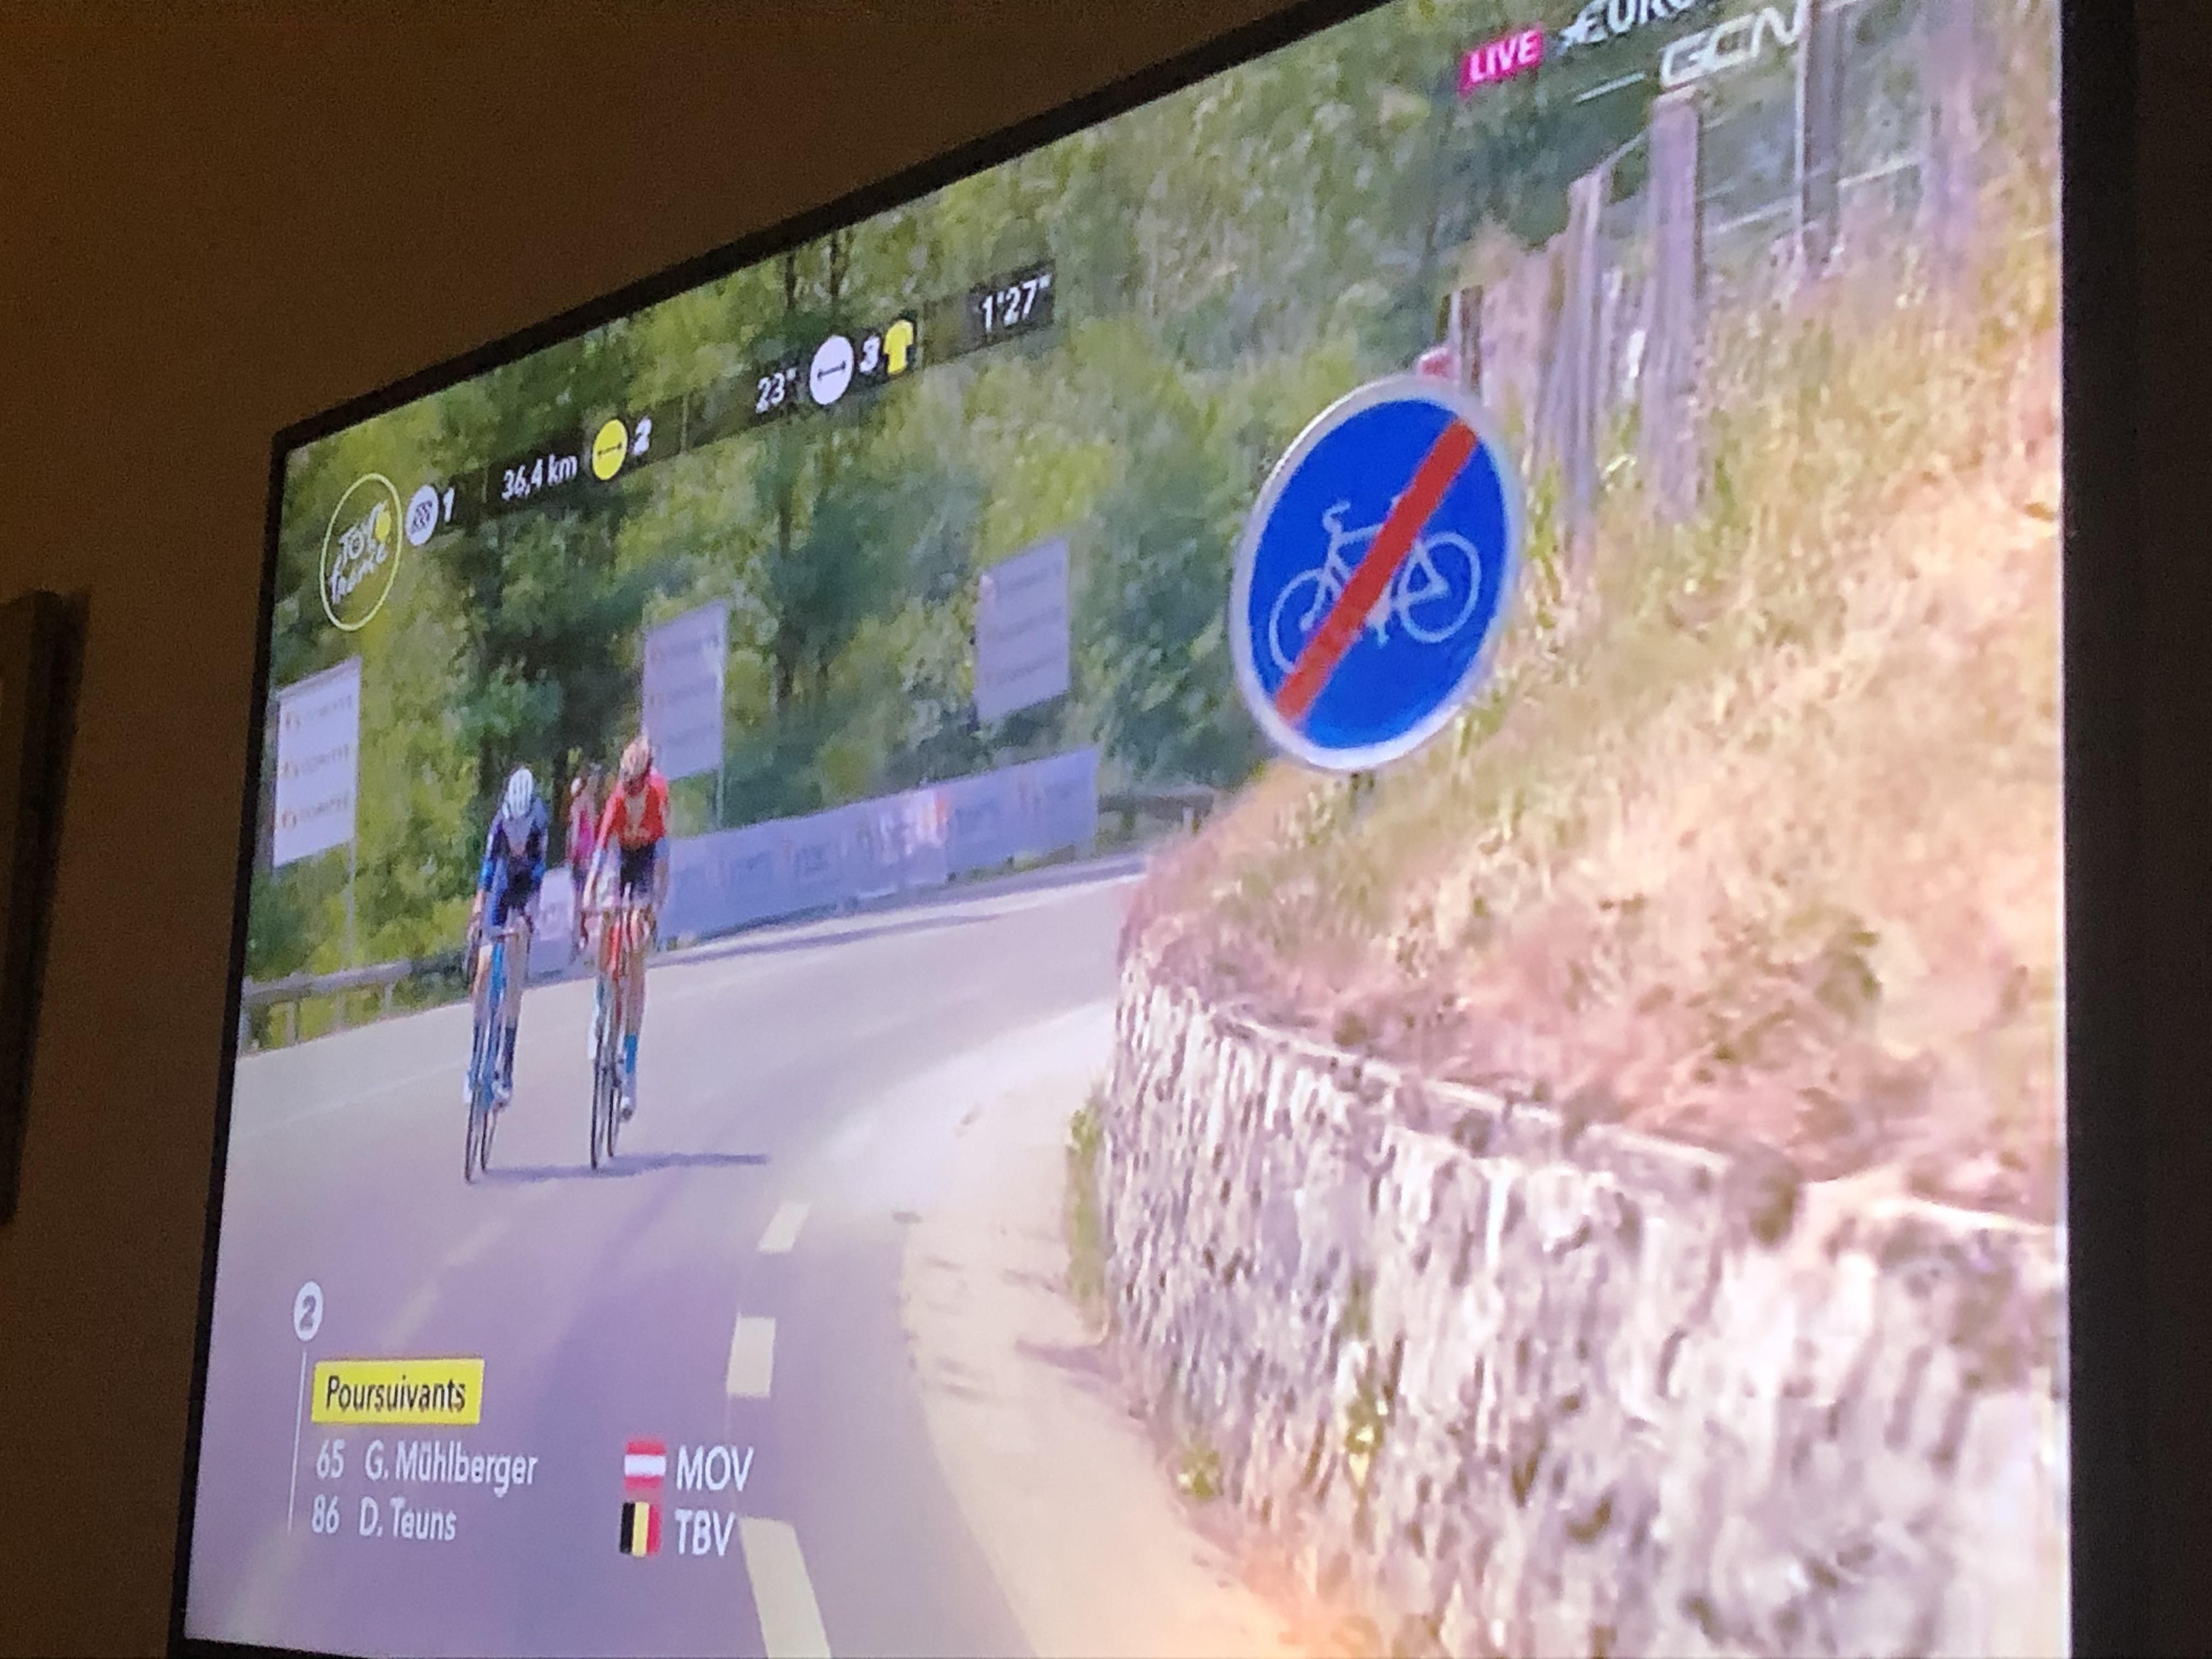 Was watching the Tour De France and thought this was funny, sorry if my sense of humour is a bit dry